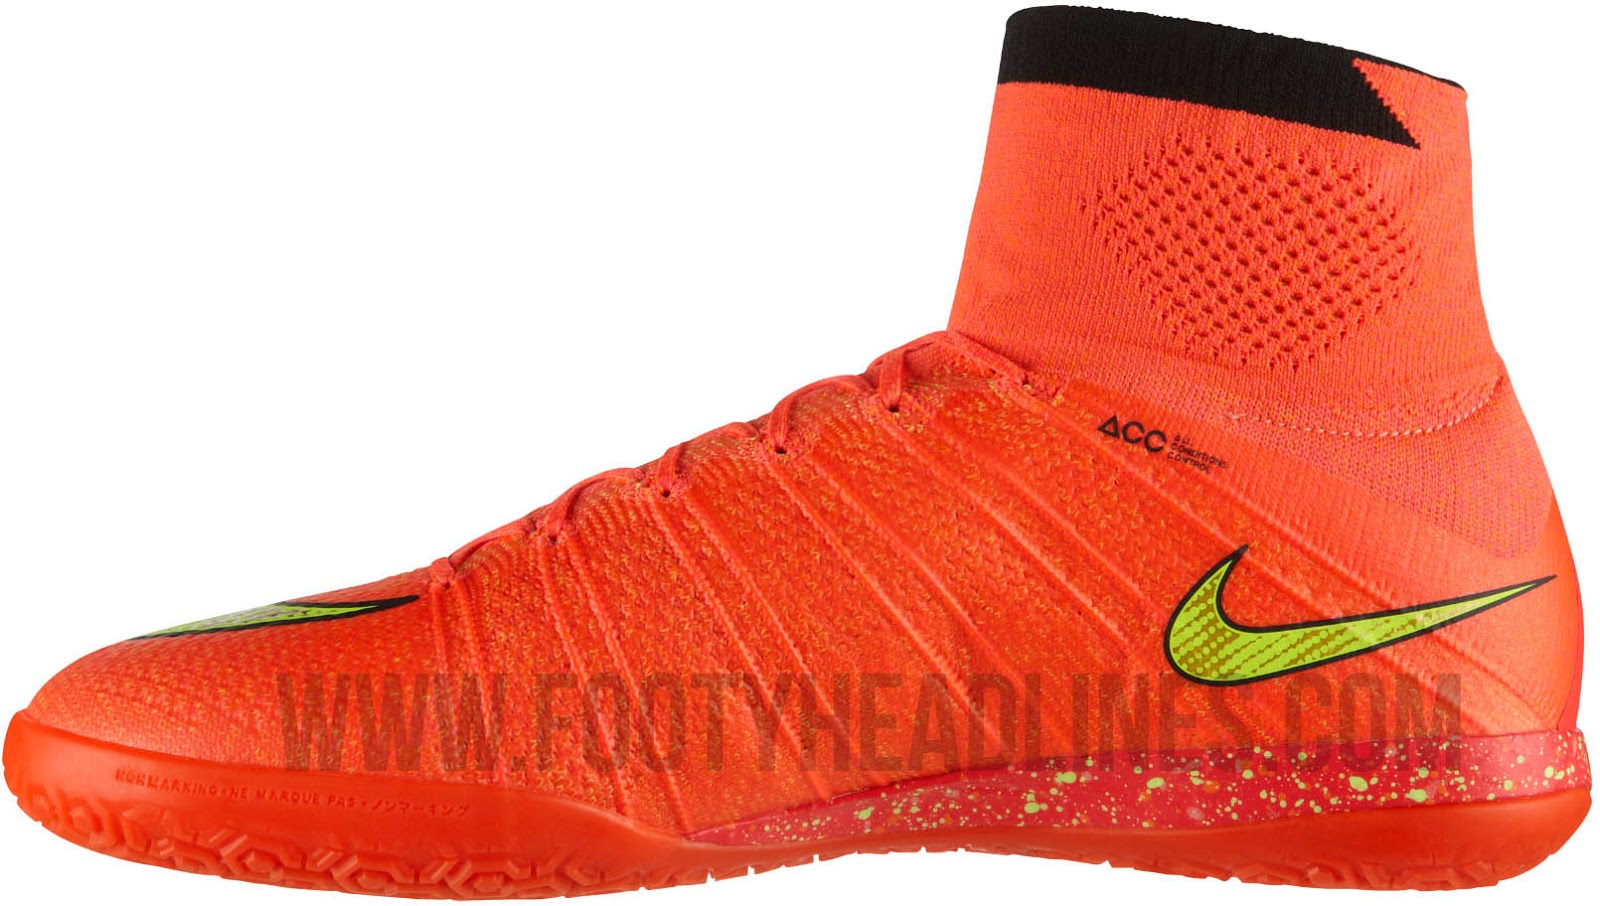 Náutico Sensible crema New Nike Elastico Superfly 2014 Boot Launched - Footy Headlines